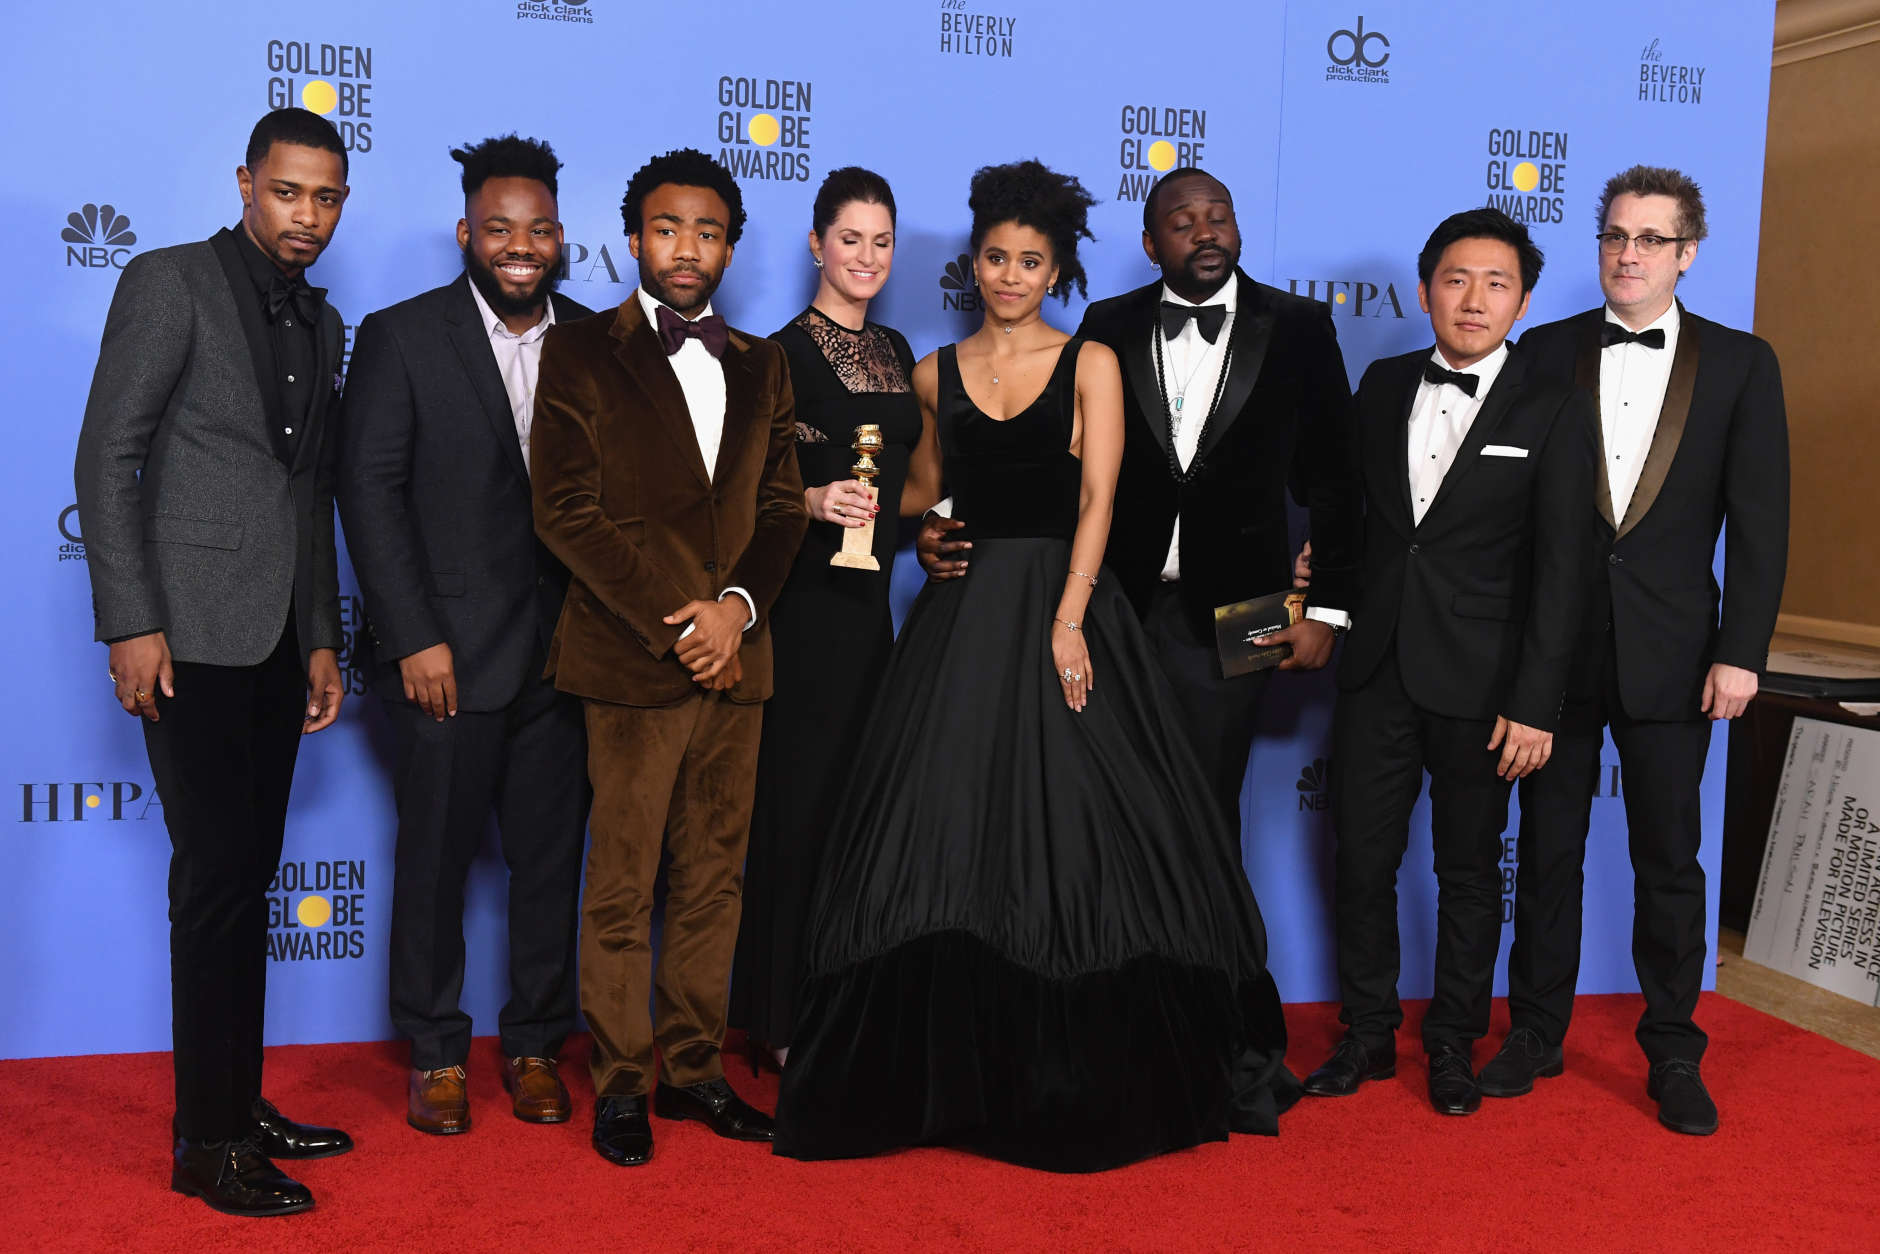 BEVERLY HILLS, CA - JANUARY 08:  Cast and crew of 'Atlanta,' winners of Best Series - Musical or Comedy, pose in the press room during the 74th Annual Golden Globe Awards at The Beverly Hilton Hotel on January 8, 2017 in Beverly Hills, California.  (Photo by Kevin Winter/Getty Images)